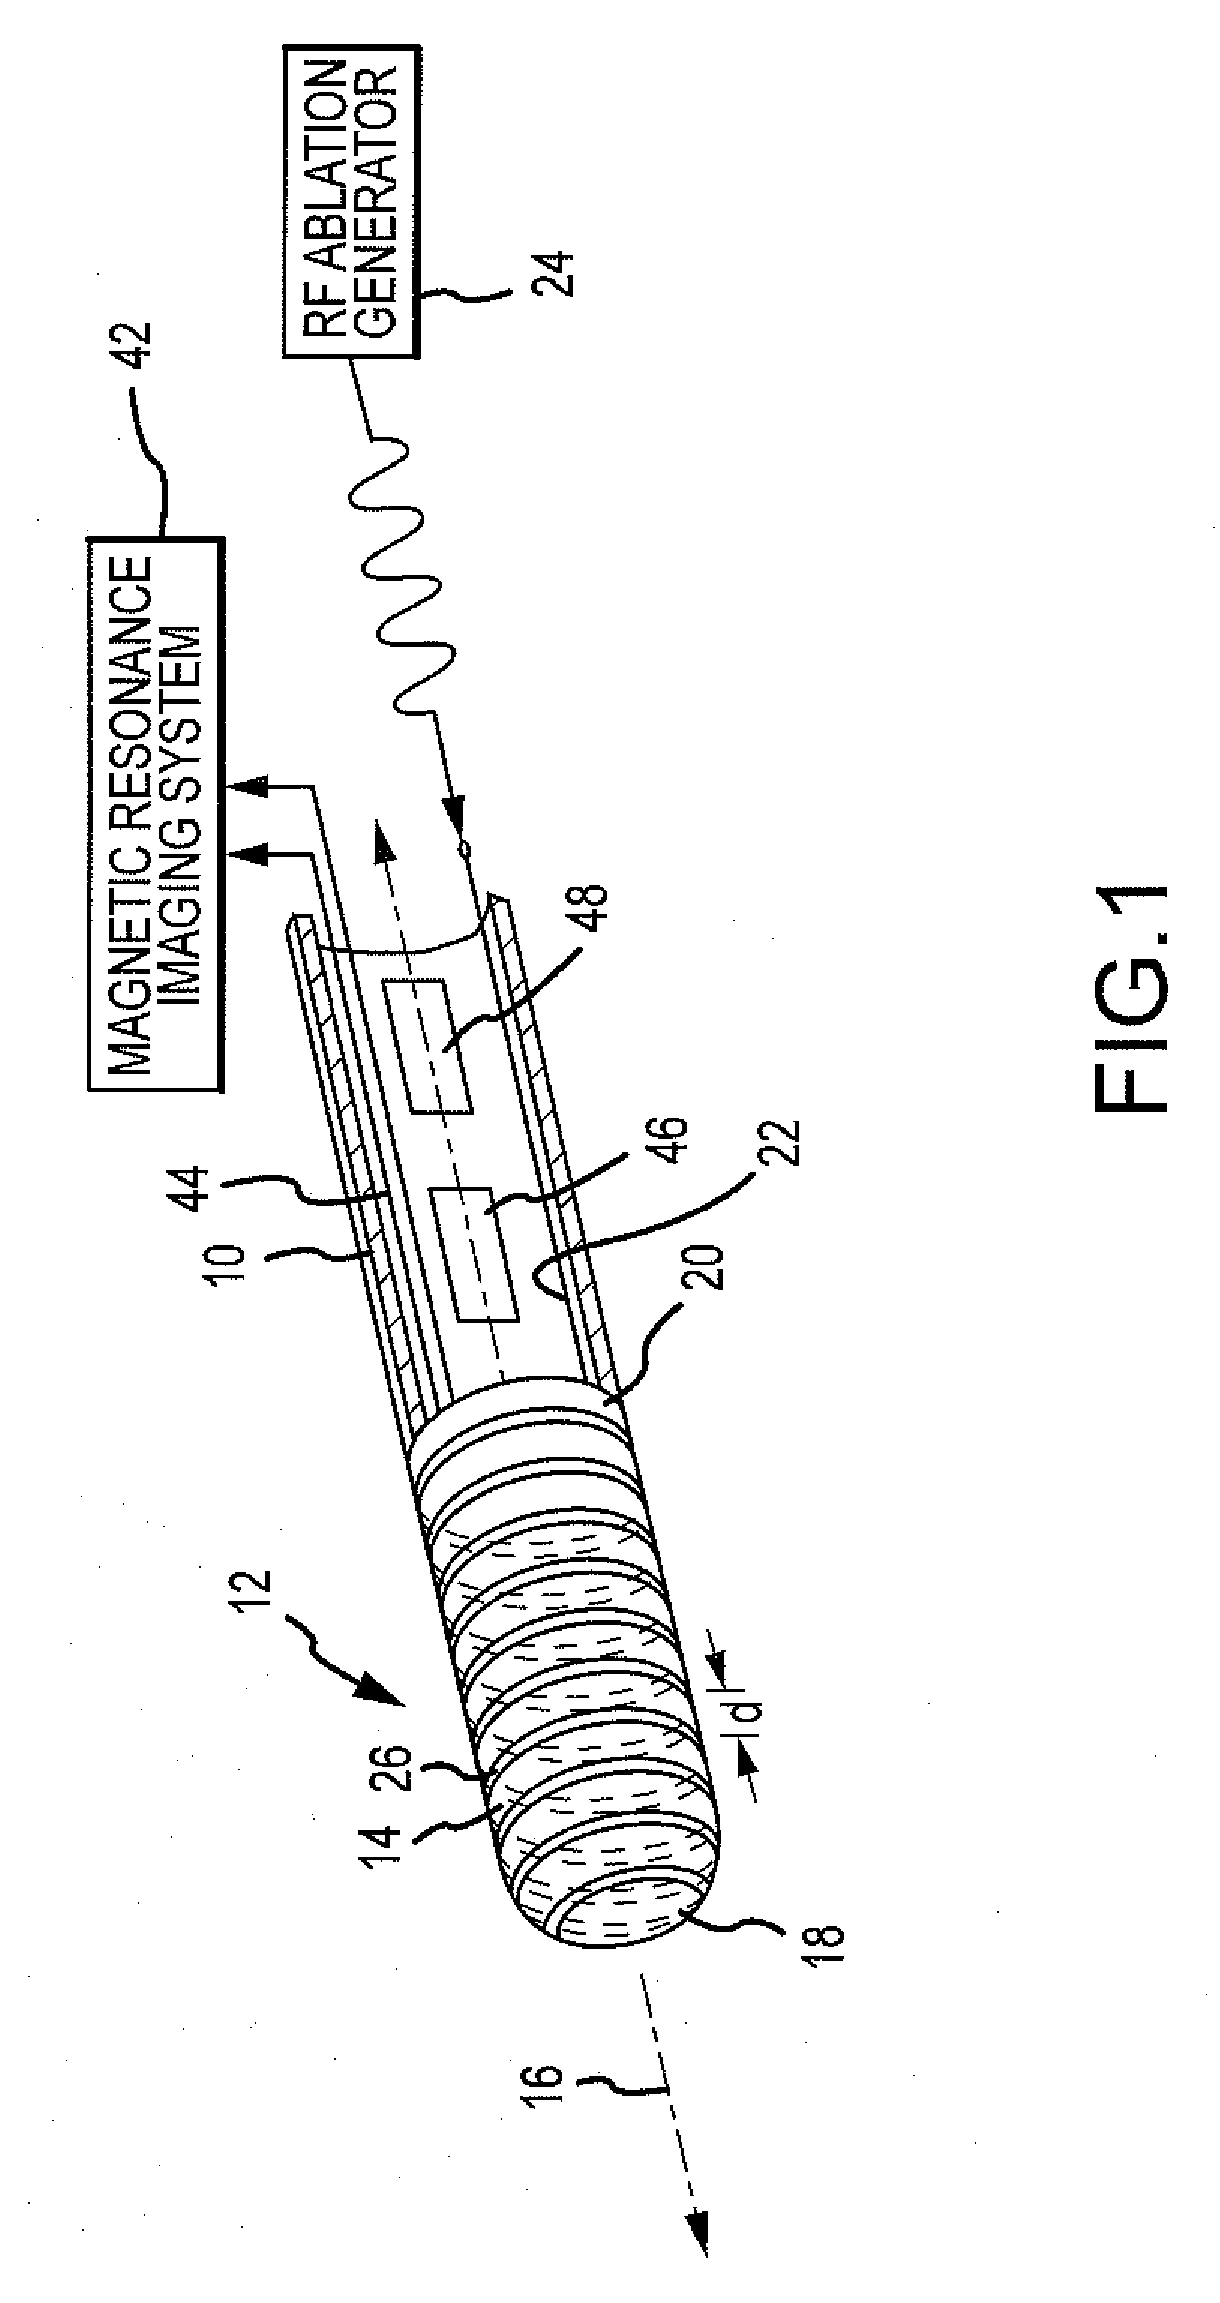 Catheter electrode that can simultaneously emit electrical energy and facilitate visualization by magnetic resonance imaging